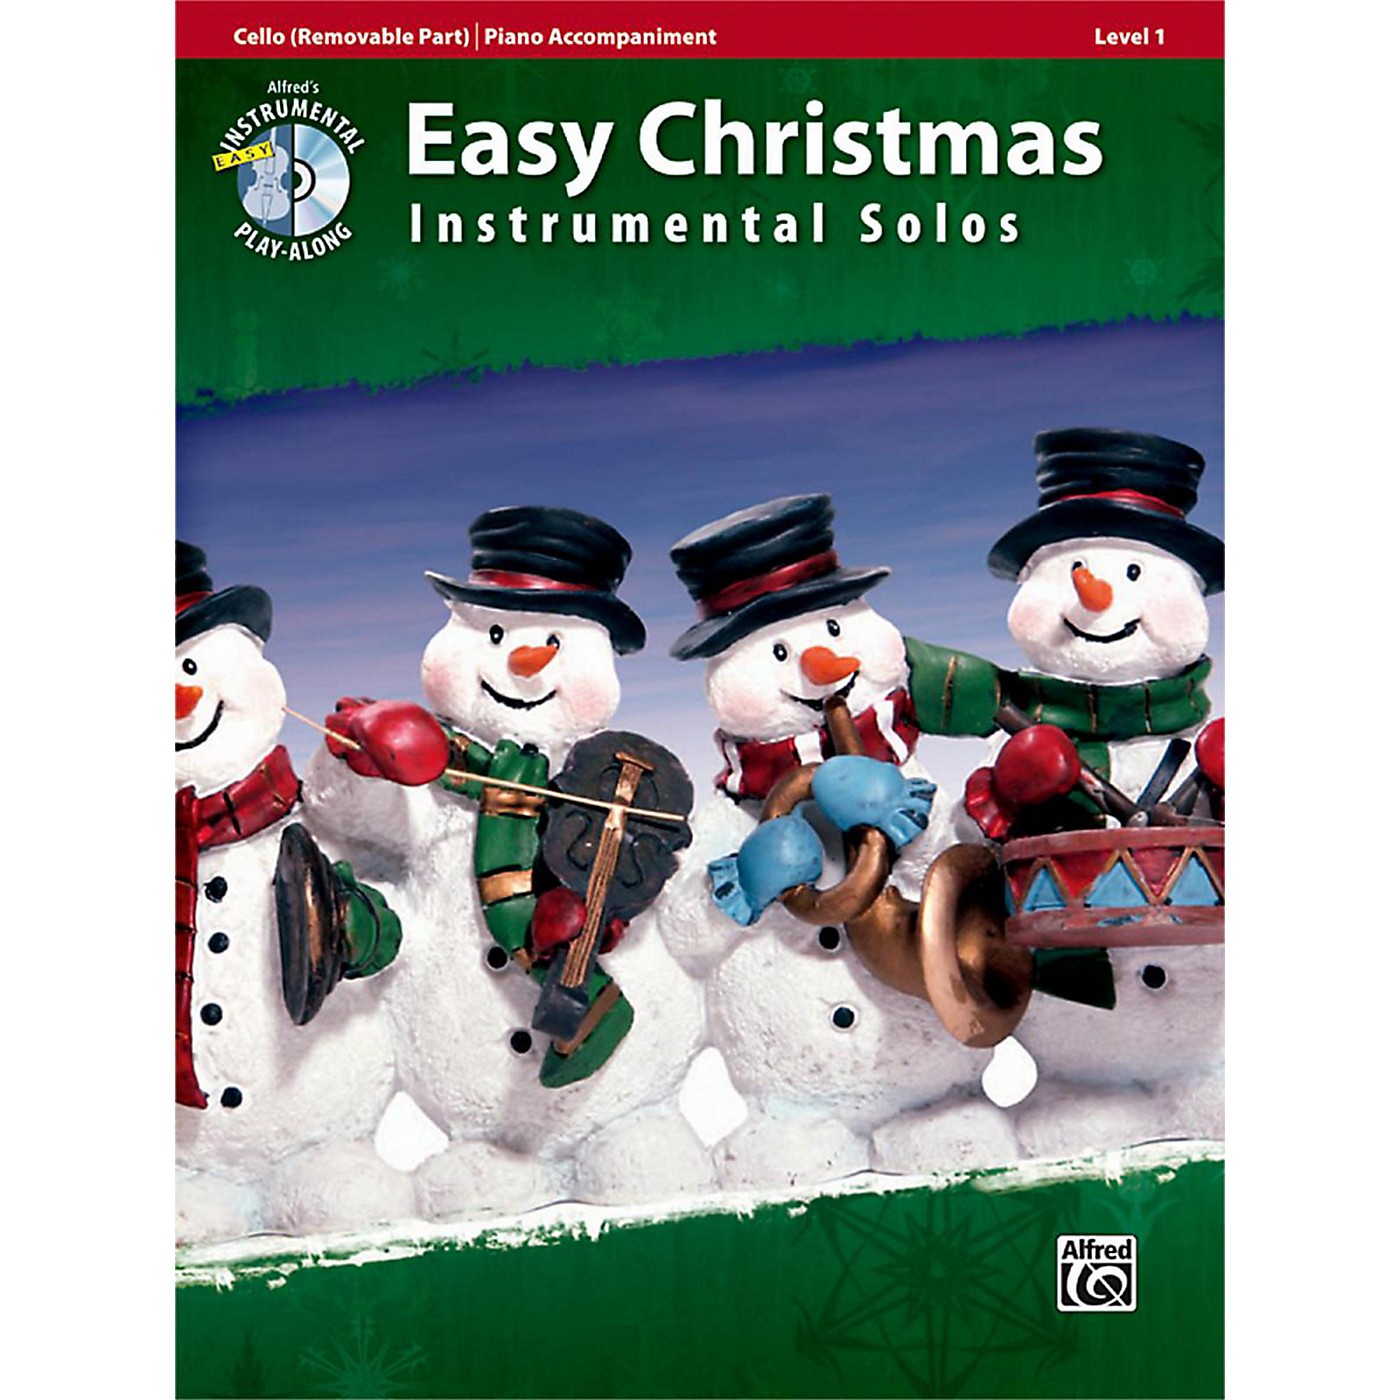 Alfred Easy Christmas Instrumental Solos Level 1 for Strings Cello Book & CD thumbnail